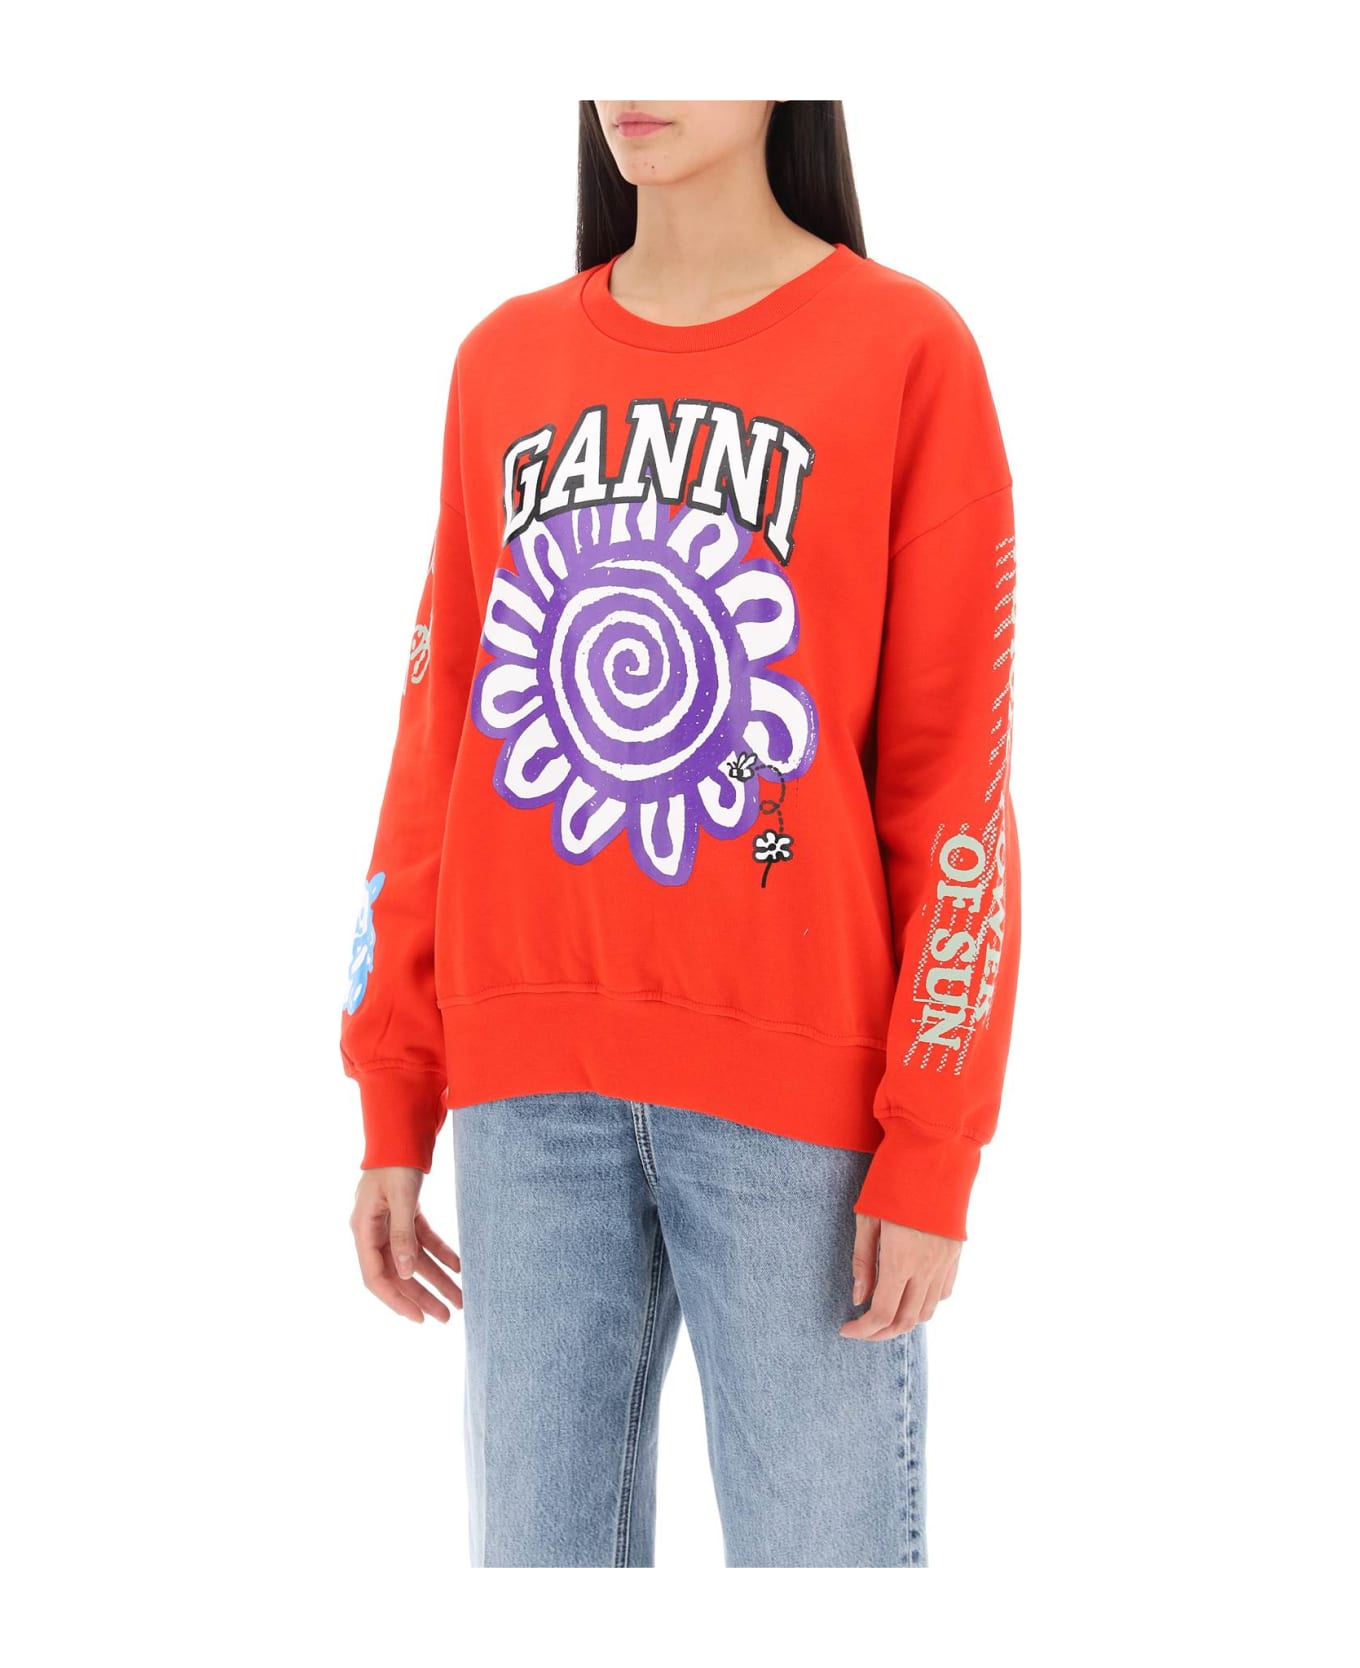 Ganni Sweatshirt With Graphic Prints - HIGH RISK RED (Red)